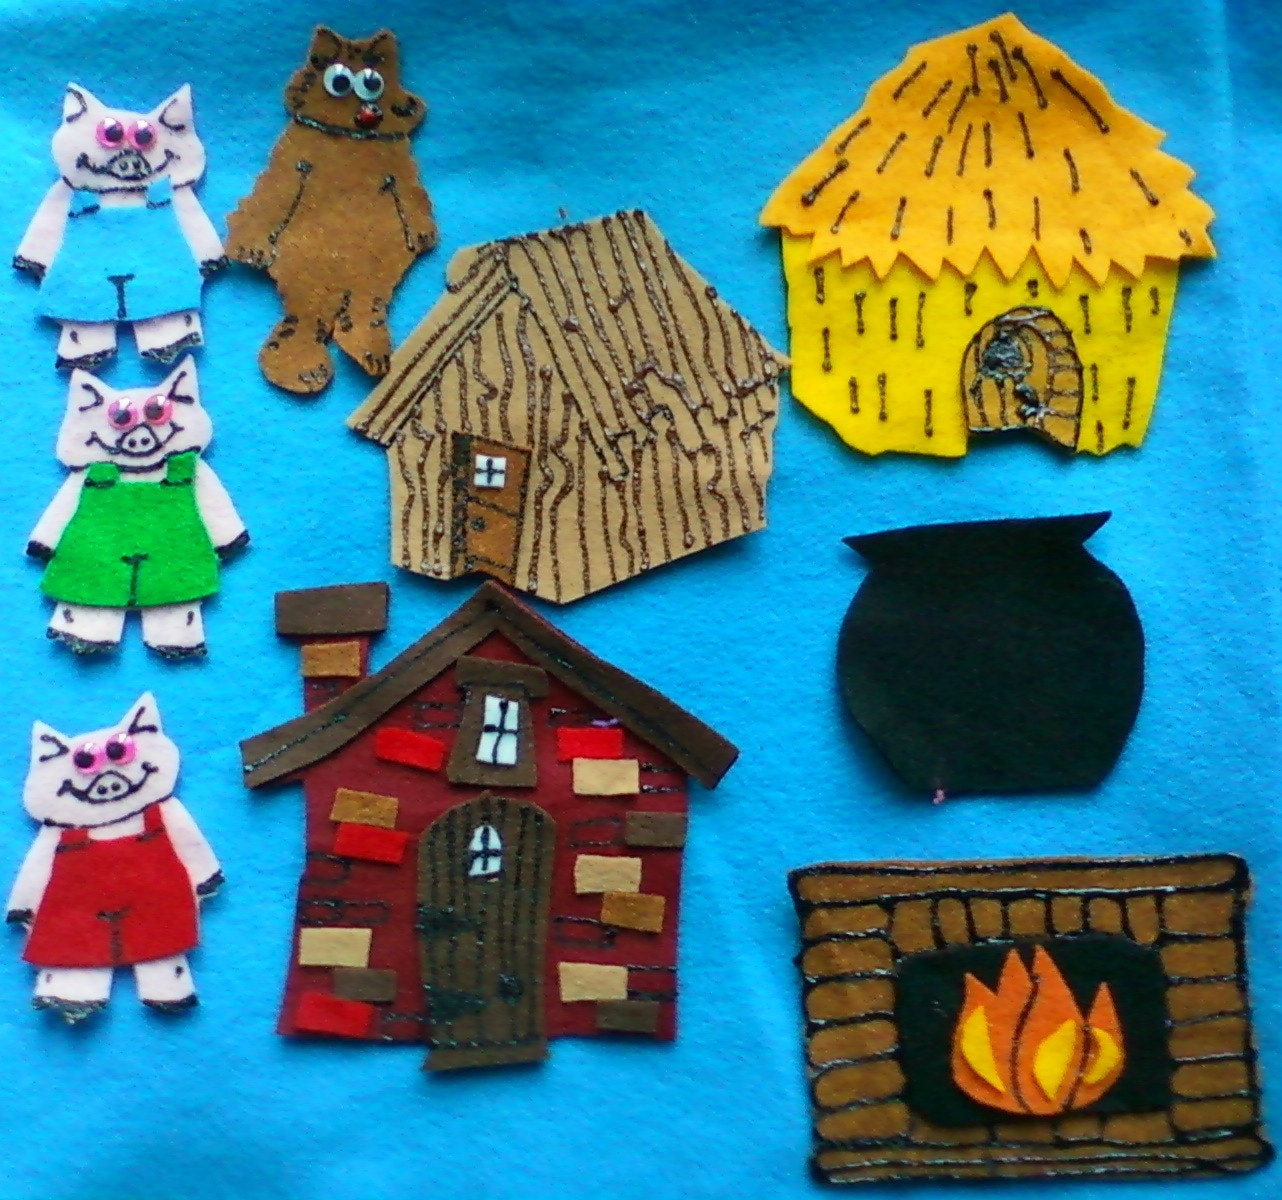 the-three-little-pigs-and-the-big-bad-wolf-flannel-board-felt-board